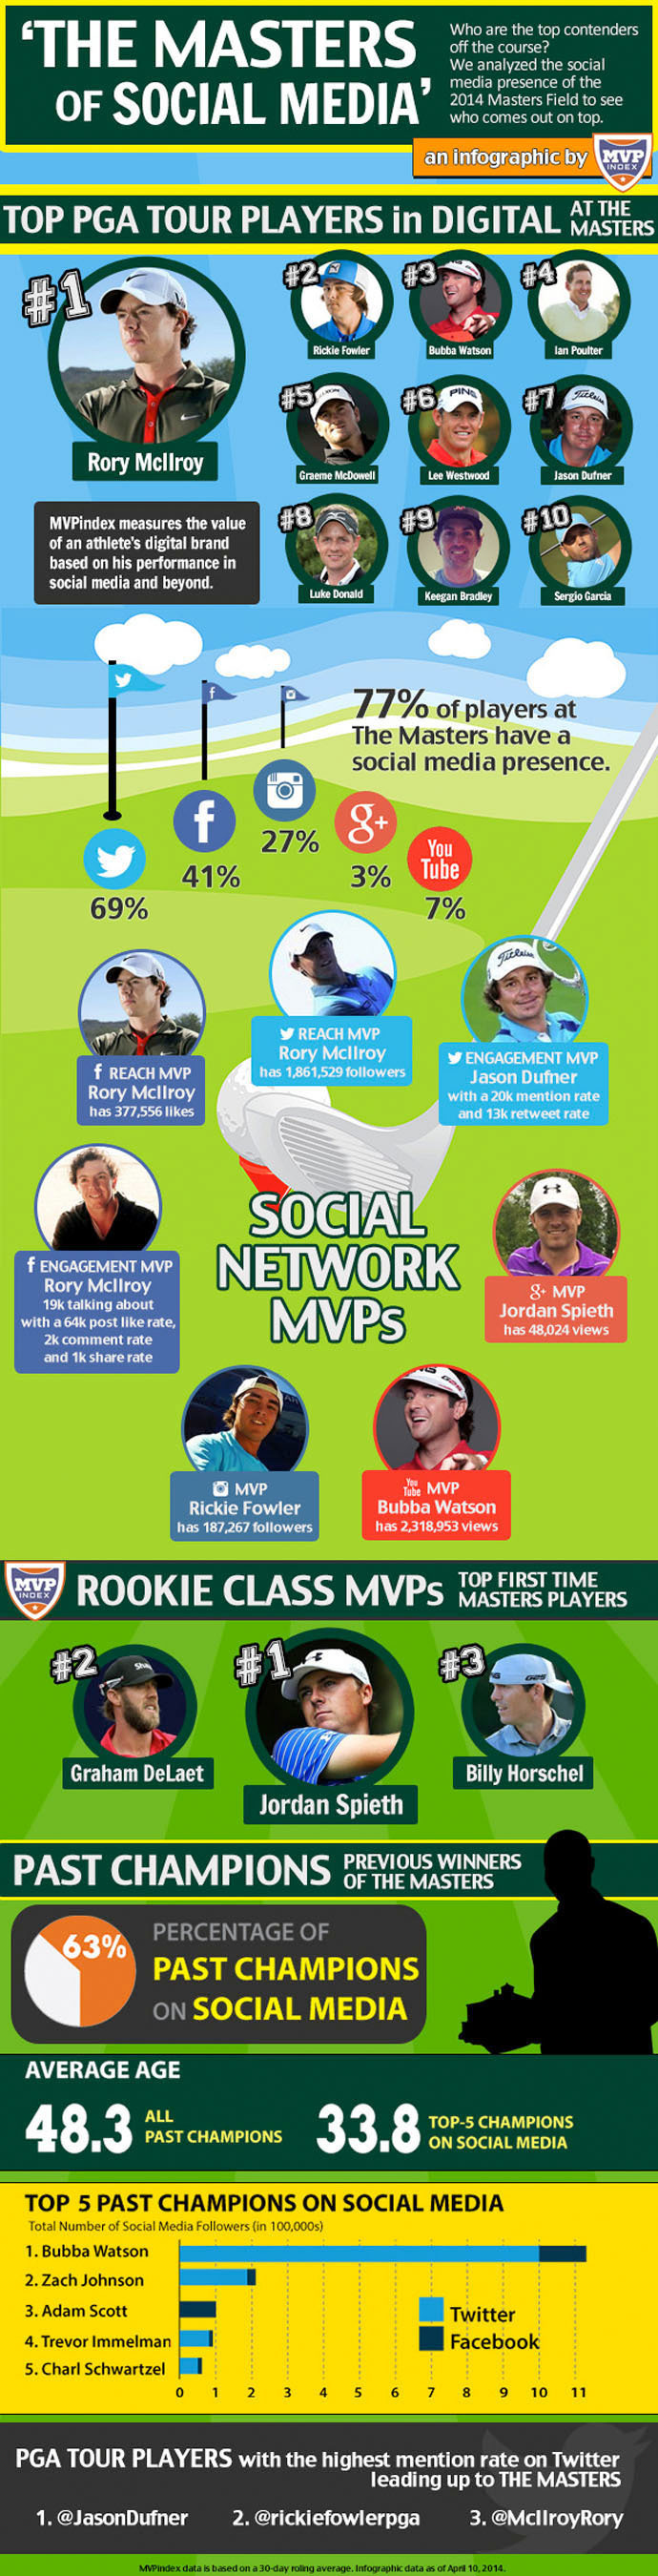 MVPindex's 'The Masters of Social Media' infographic ranks the social media presence of Master contenders off the course. (PRNewsFoto/Stout Partners, LP) (PRNewsFoto/STOUT PARTNERS_ LP)